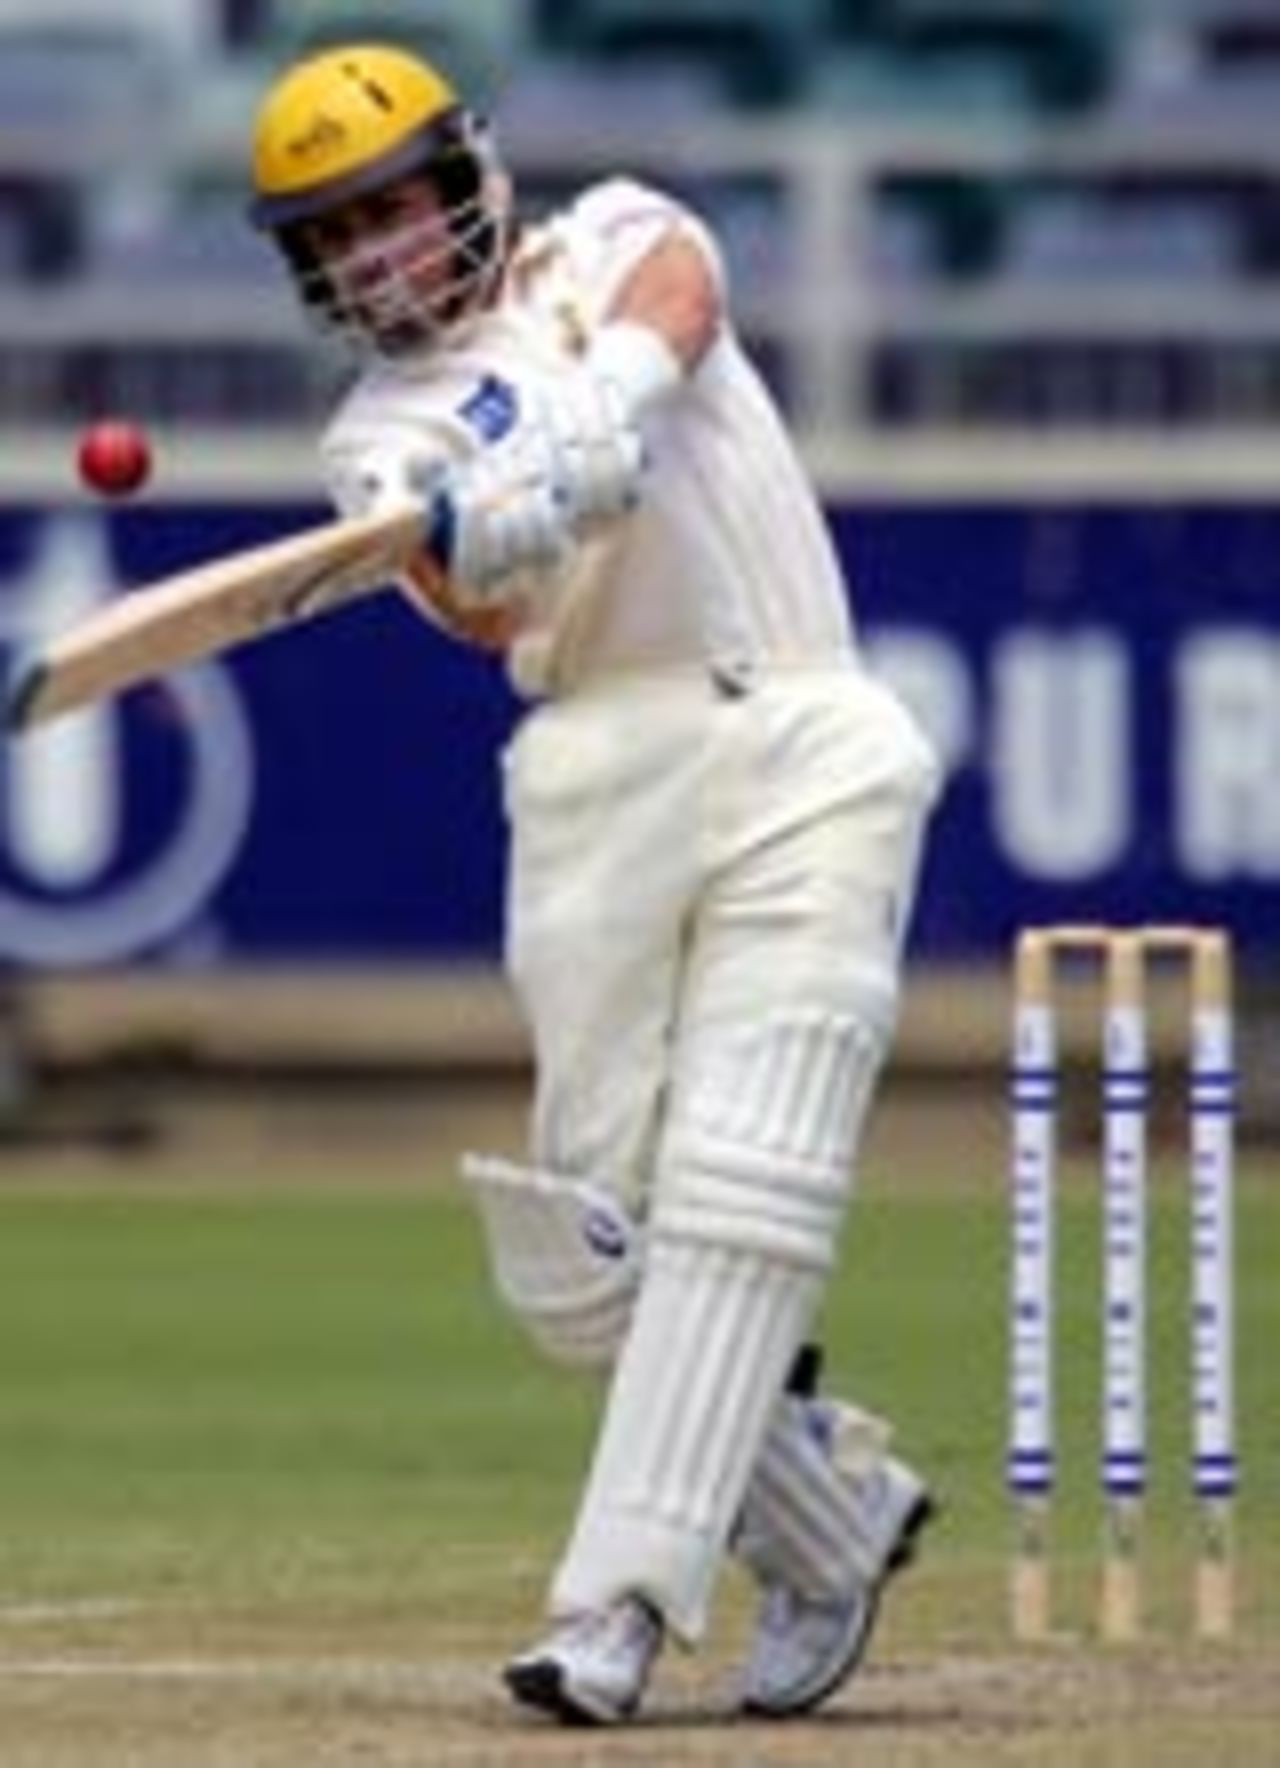 Ryan Campbell drives, Western Australia v Queensland, Pura Cup, Perth, 2nd day, November 22, 2004